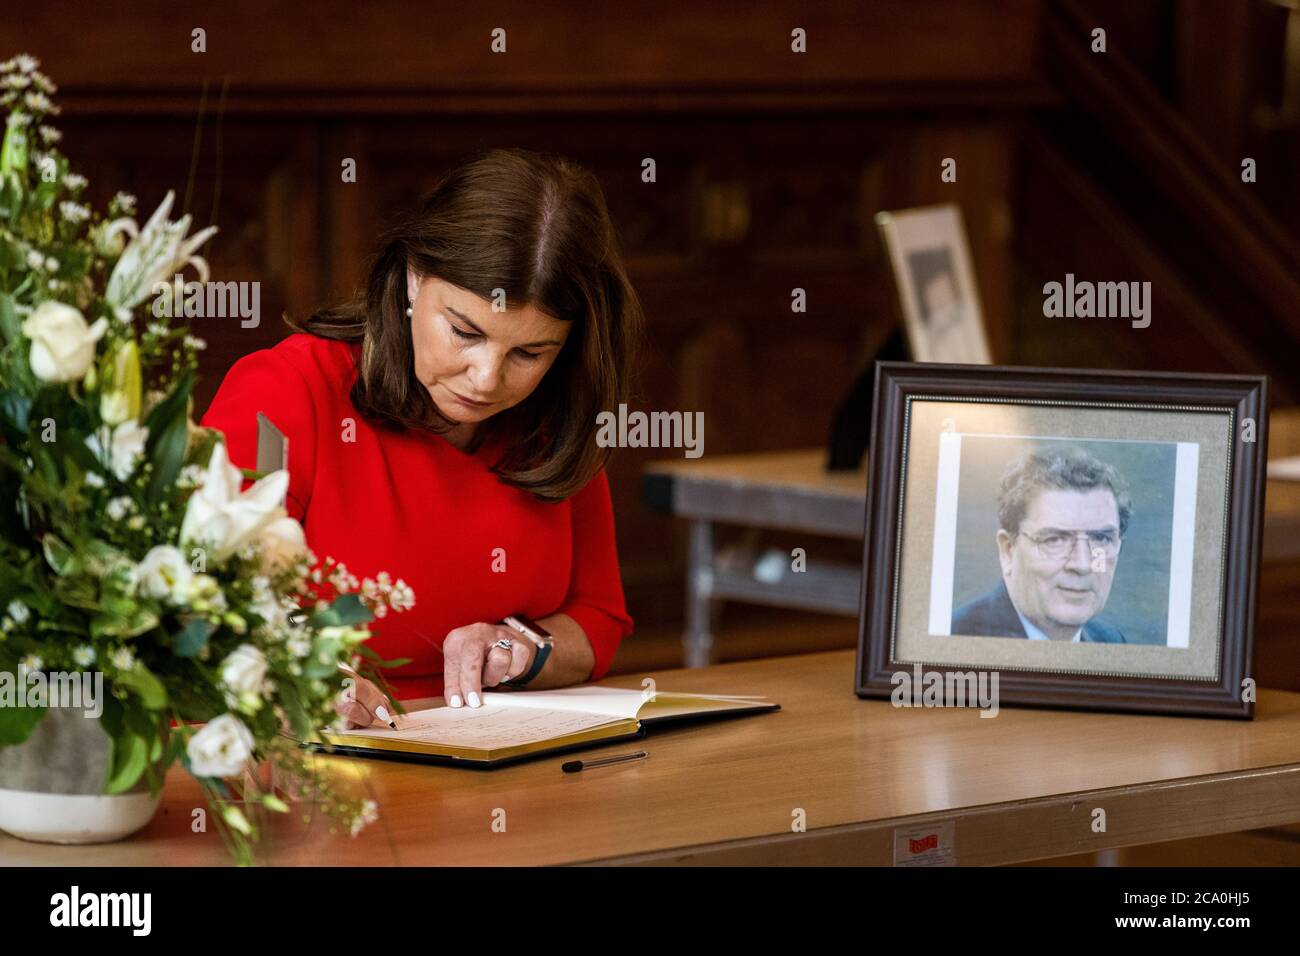 Sinead McLoughlin MLA signing the book of condolence at Guildhall in Derry City to John Hume. The Former SDLP leader, who was one of the key architects of peace in Northern Ireland, has died at the age of 83. Stock Photo